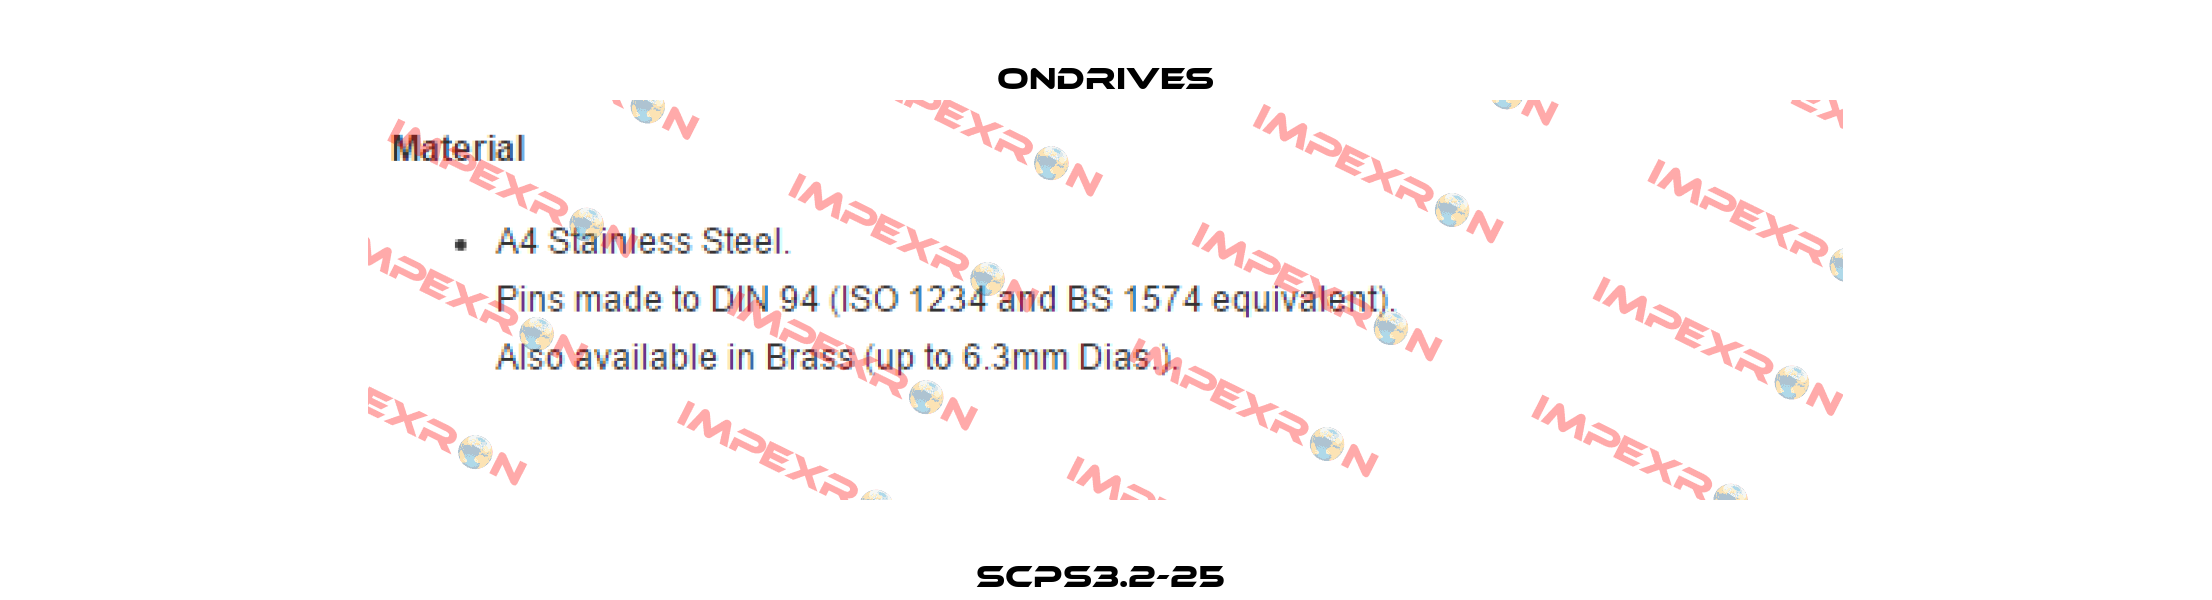 SCPS3.2-25  Ondrives